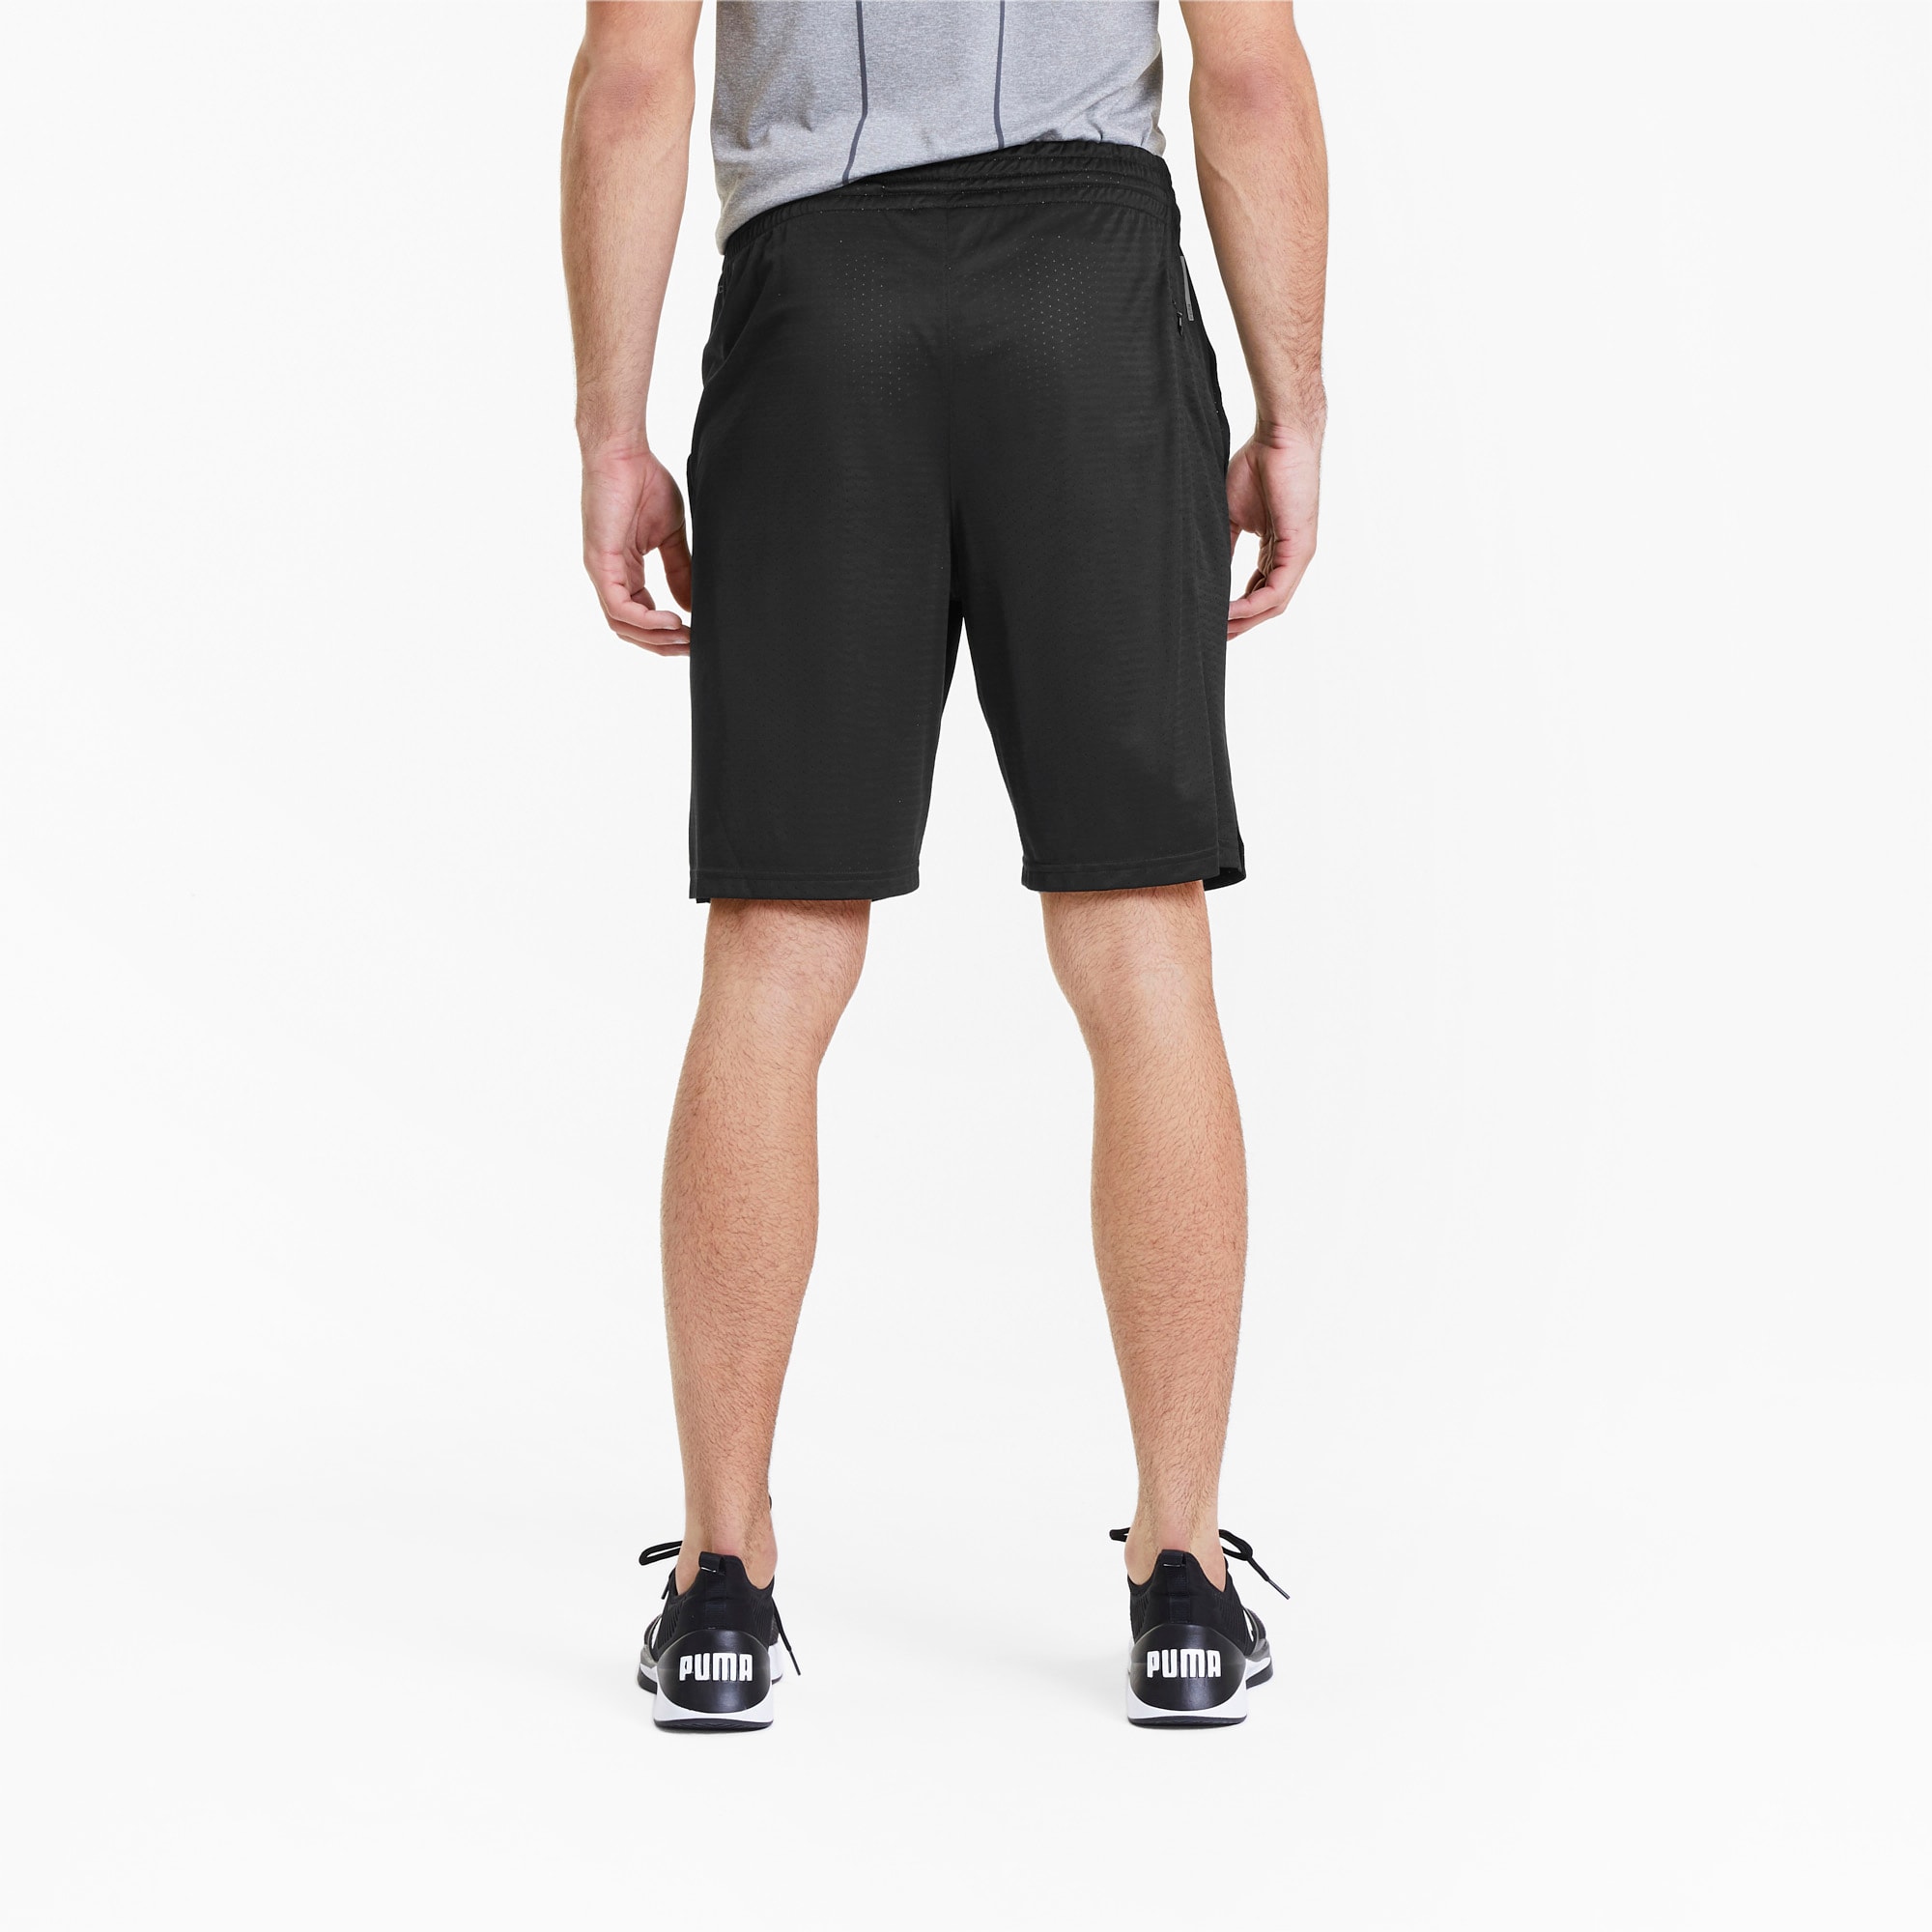 Reactive Men's Knitted Training Shorts